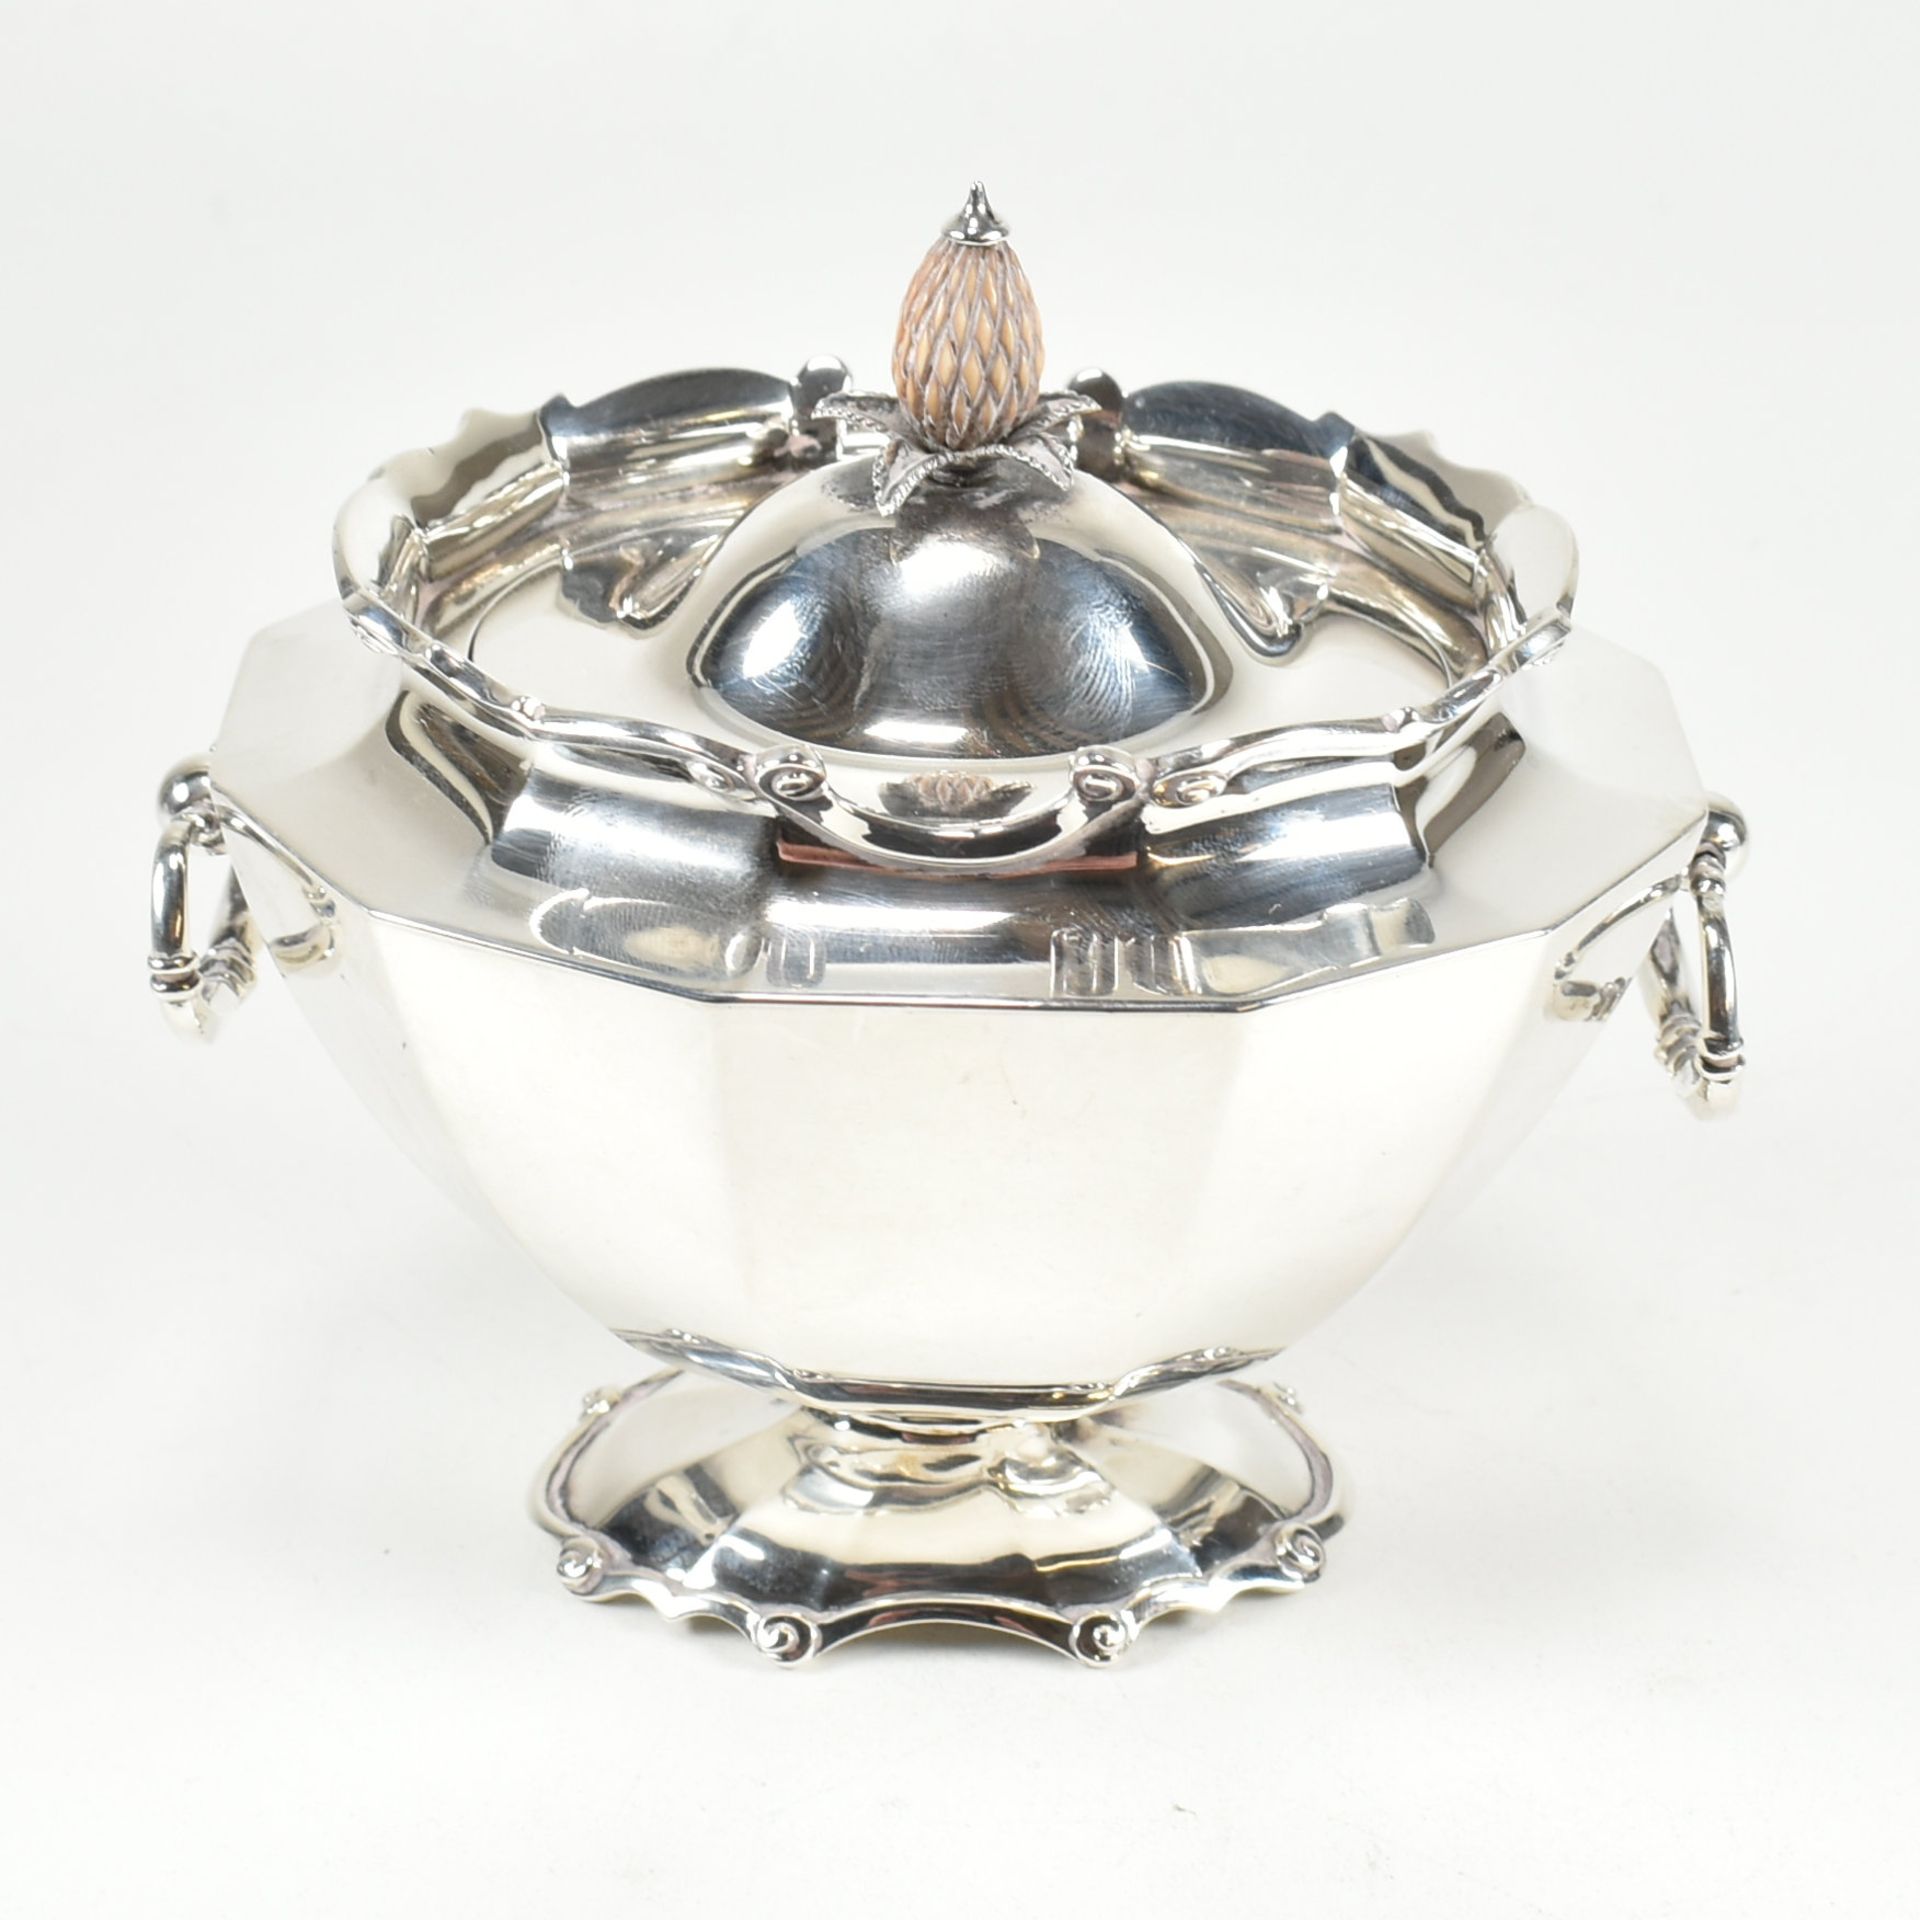 EARLY 20TH CENTURY HALLMARKED SILVER TEA CADDY - Image 2 of 8